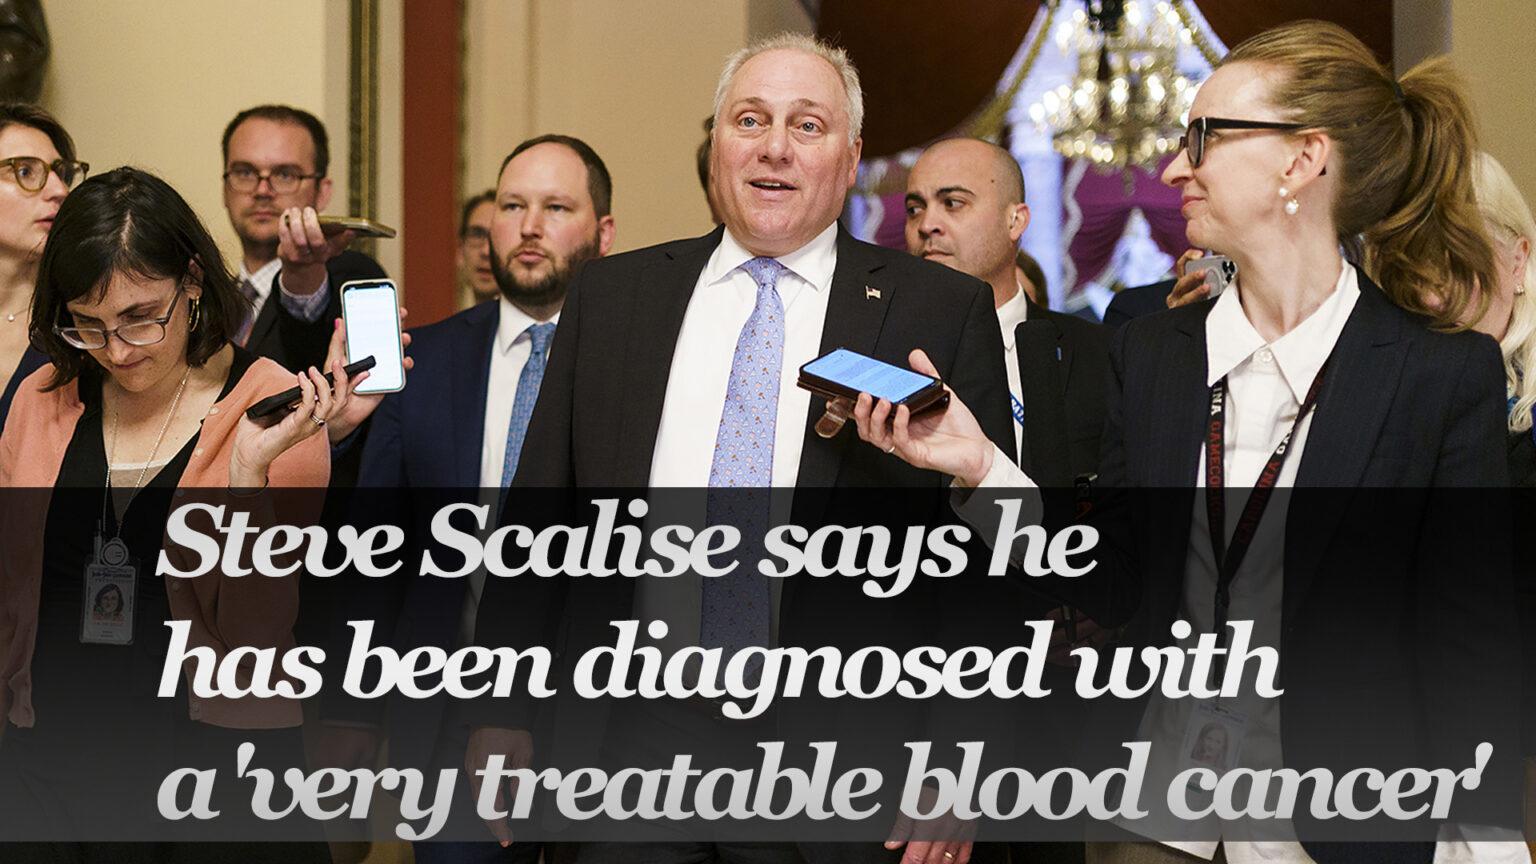 Rep. Steve Scalise Reveals 'Very Treatable' Multiple Myeloma Blood Cancer Diagnosis